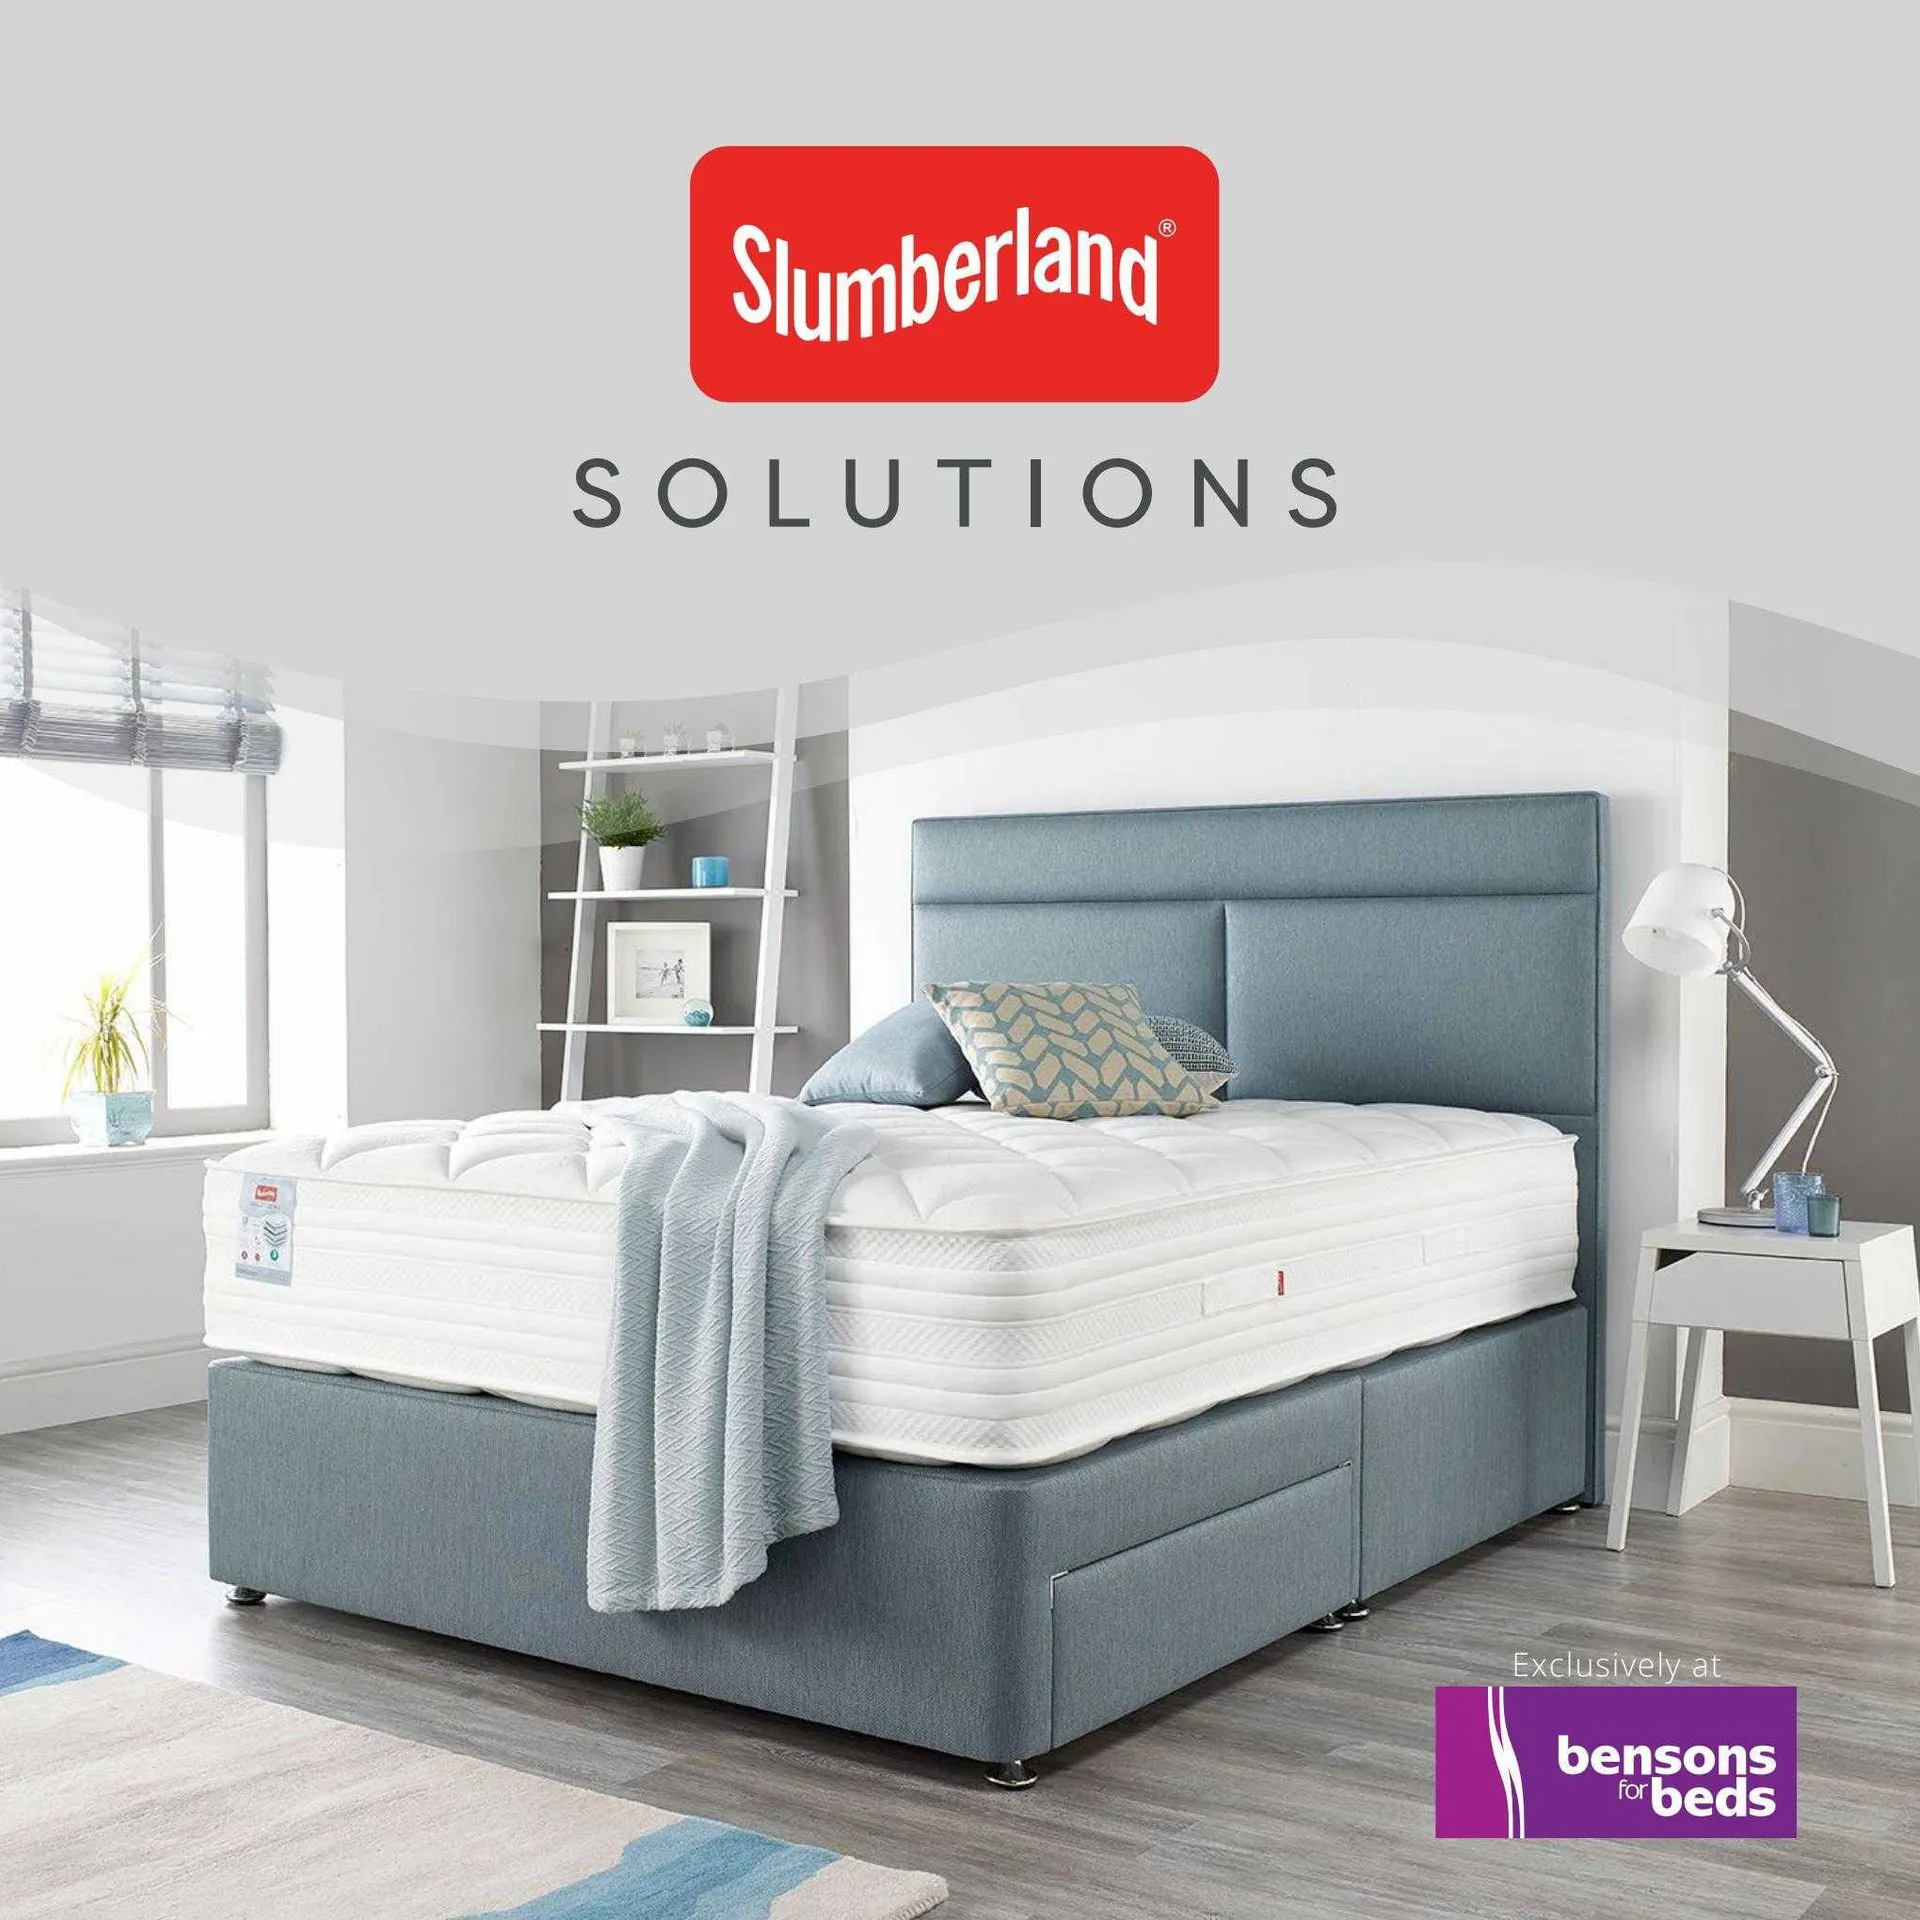 Bensons For Beds Weekly Offers - 1